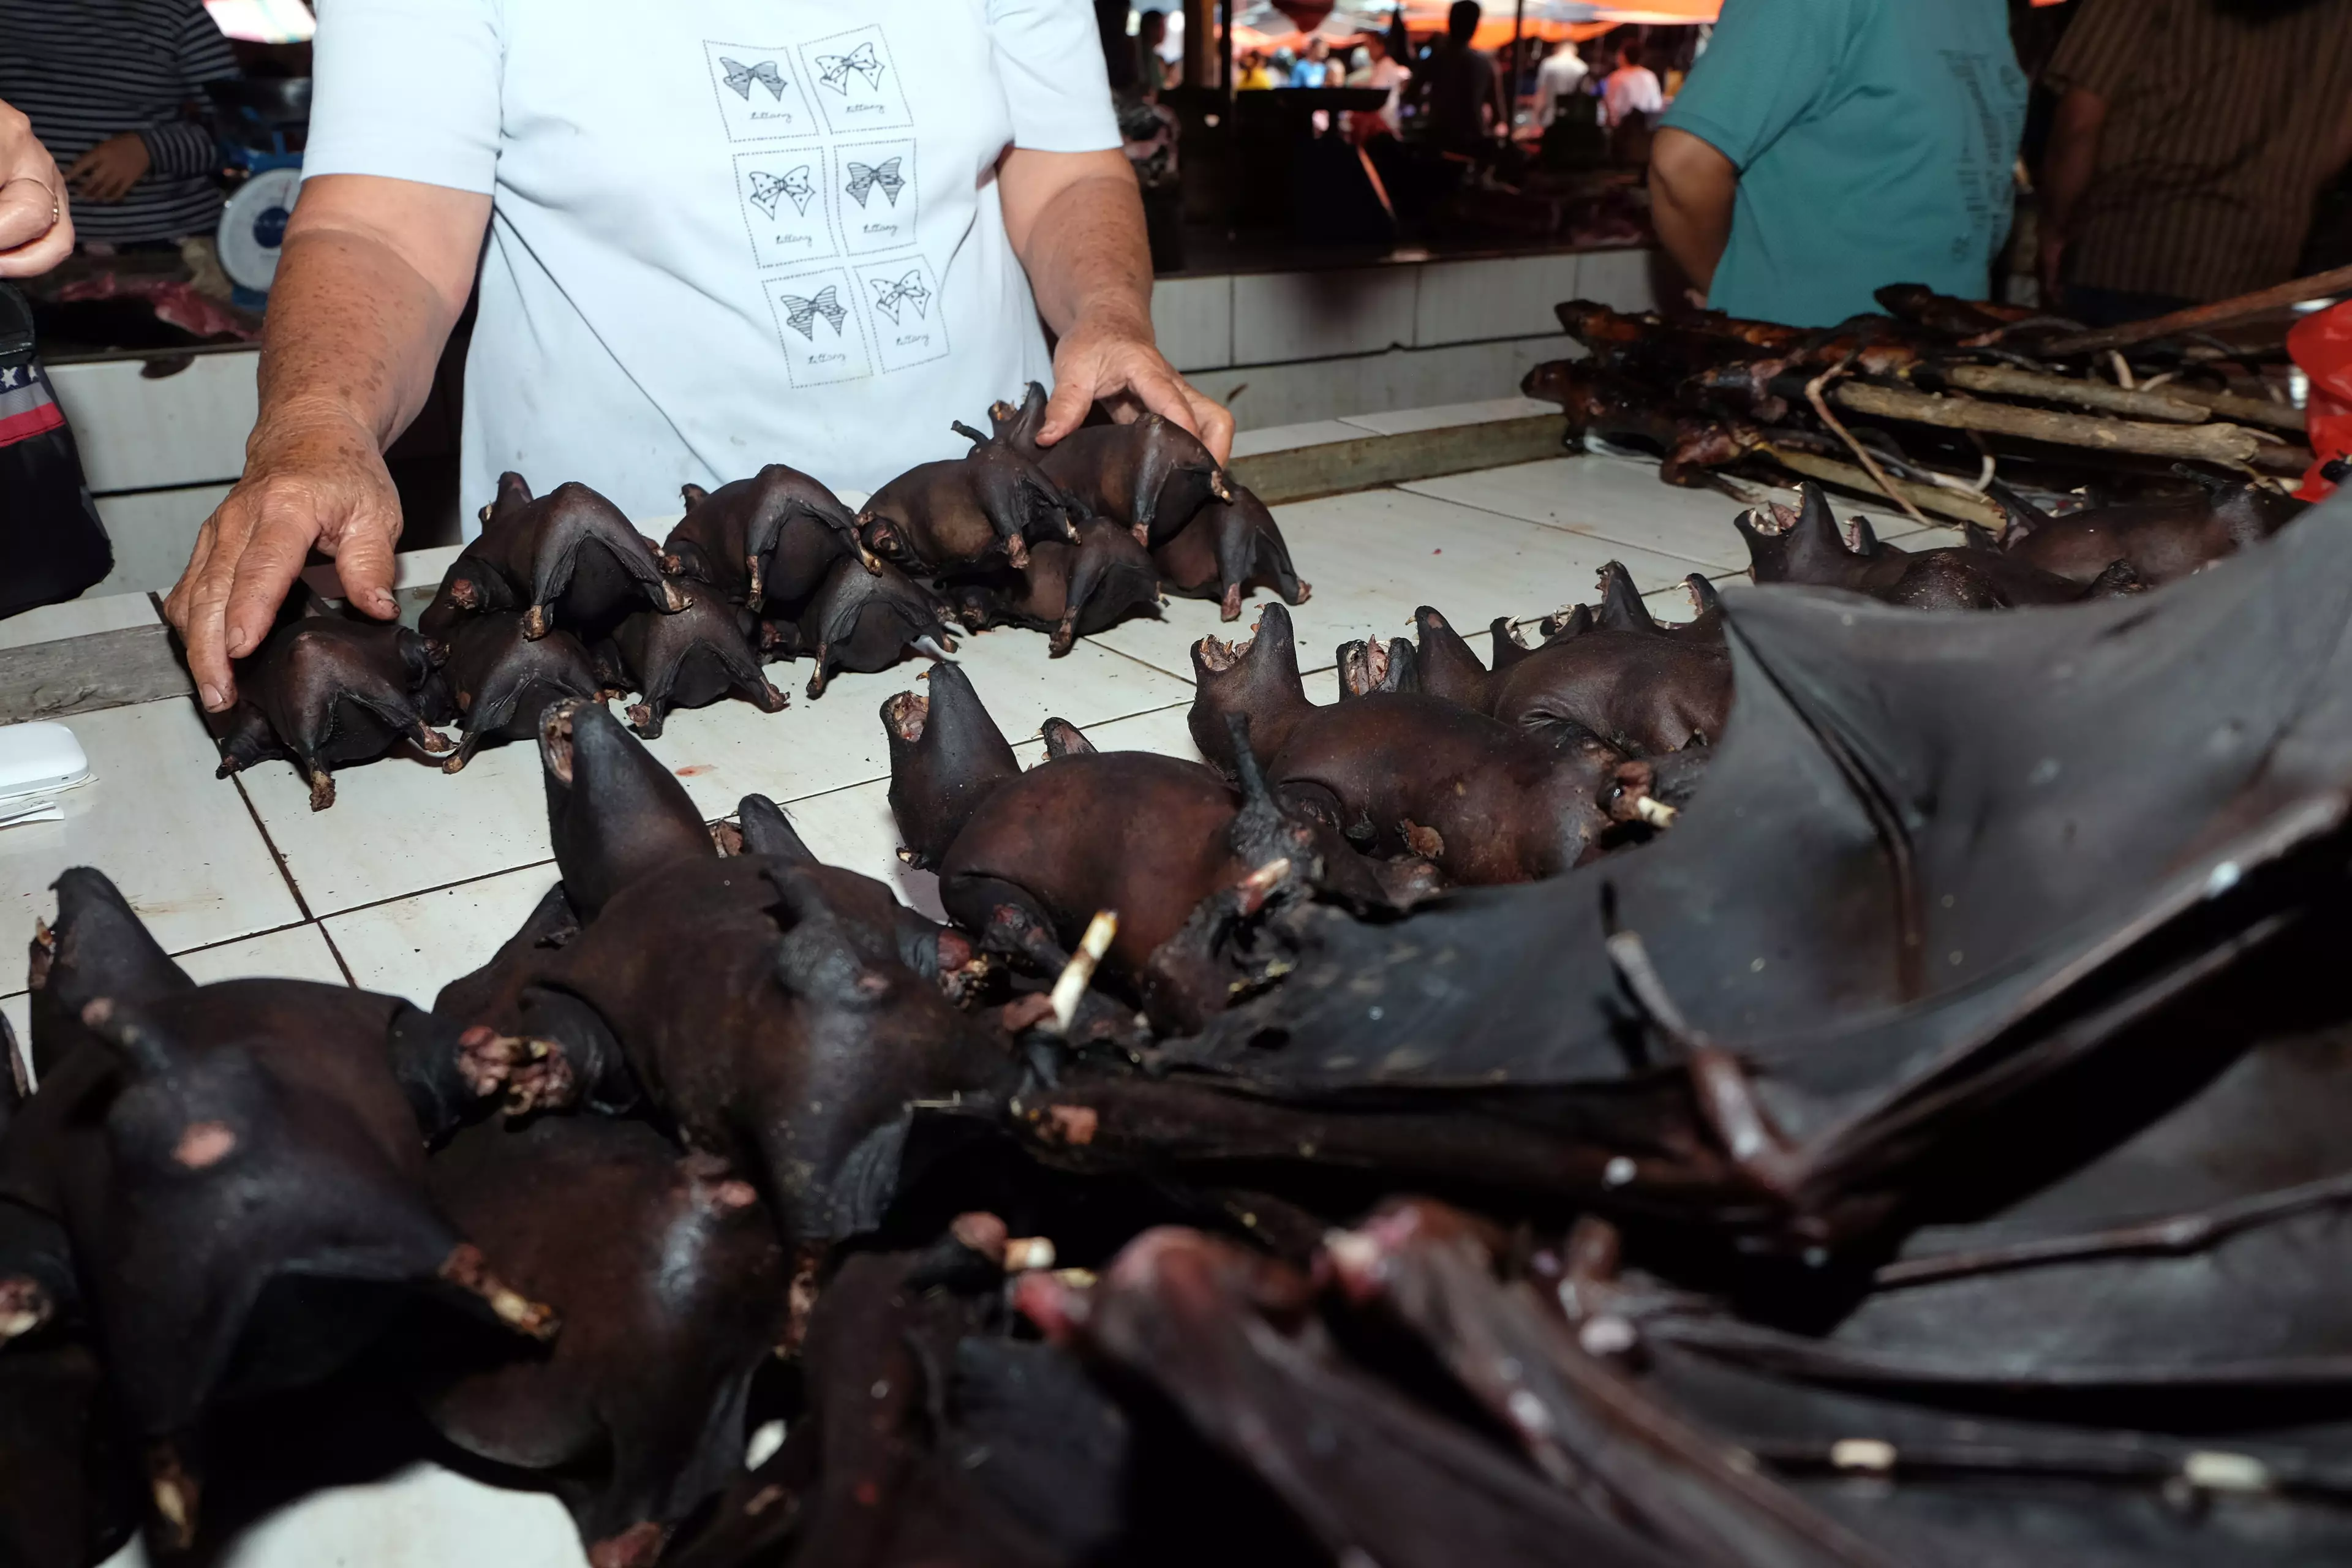 Pictures from February 2020 show bats being sold at Tomohon Market.